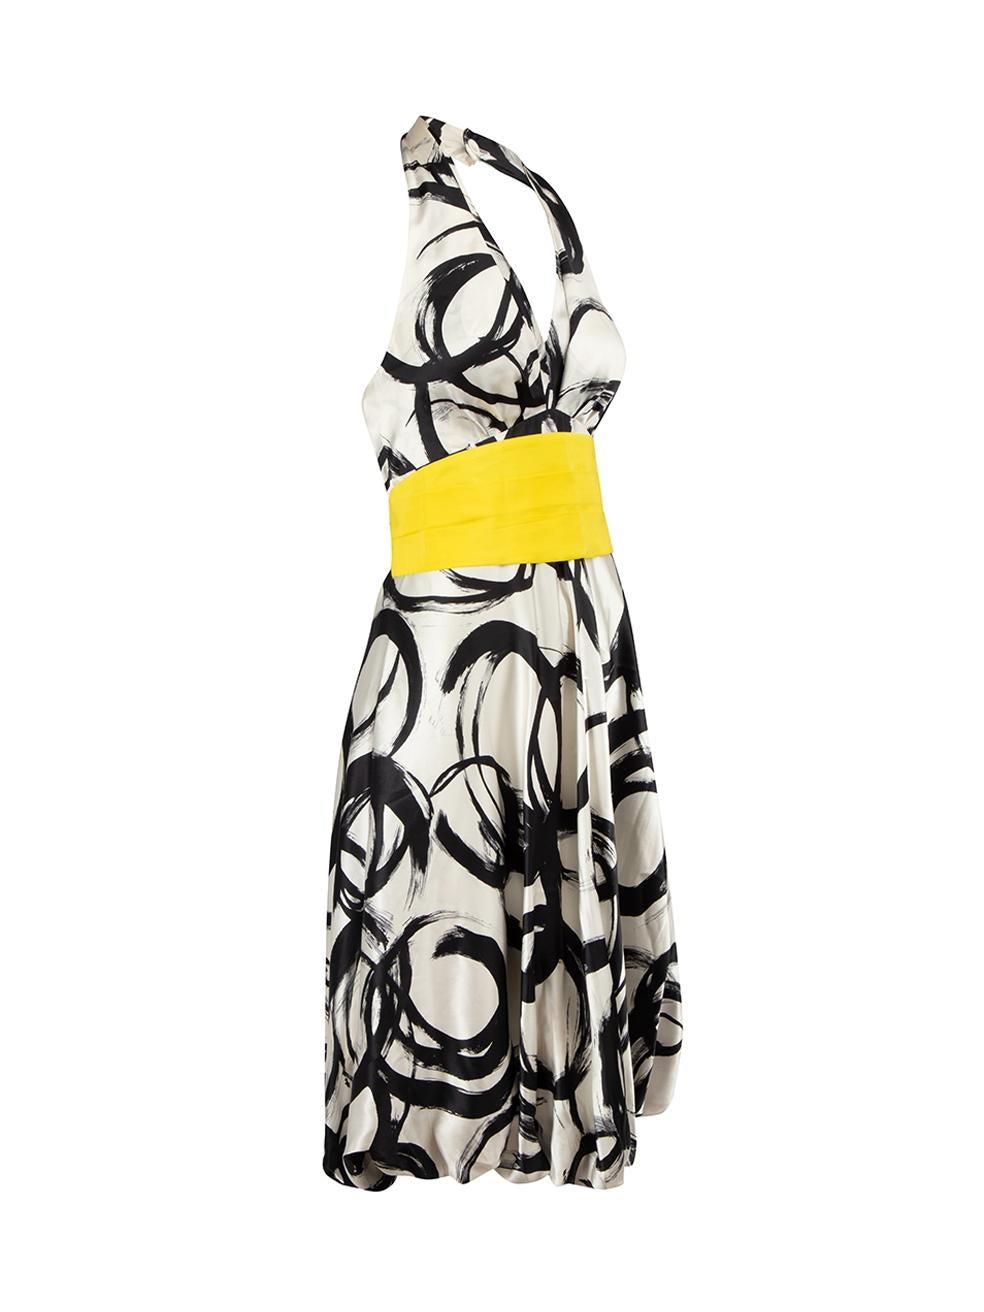 CONDITION is Very good. Minimal wear to dress is evident. Minimal wear to the belt with small marks to the front and lining on this used Max Mara designer resale item.
  
Details
White
Silk
Dress
Midi
Black paint stroke abstract